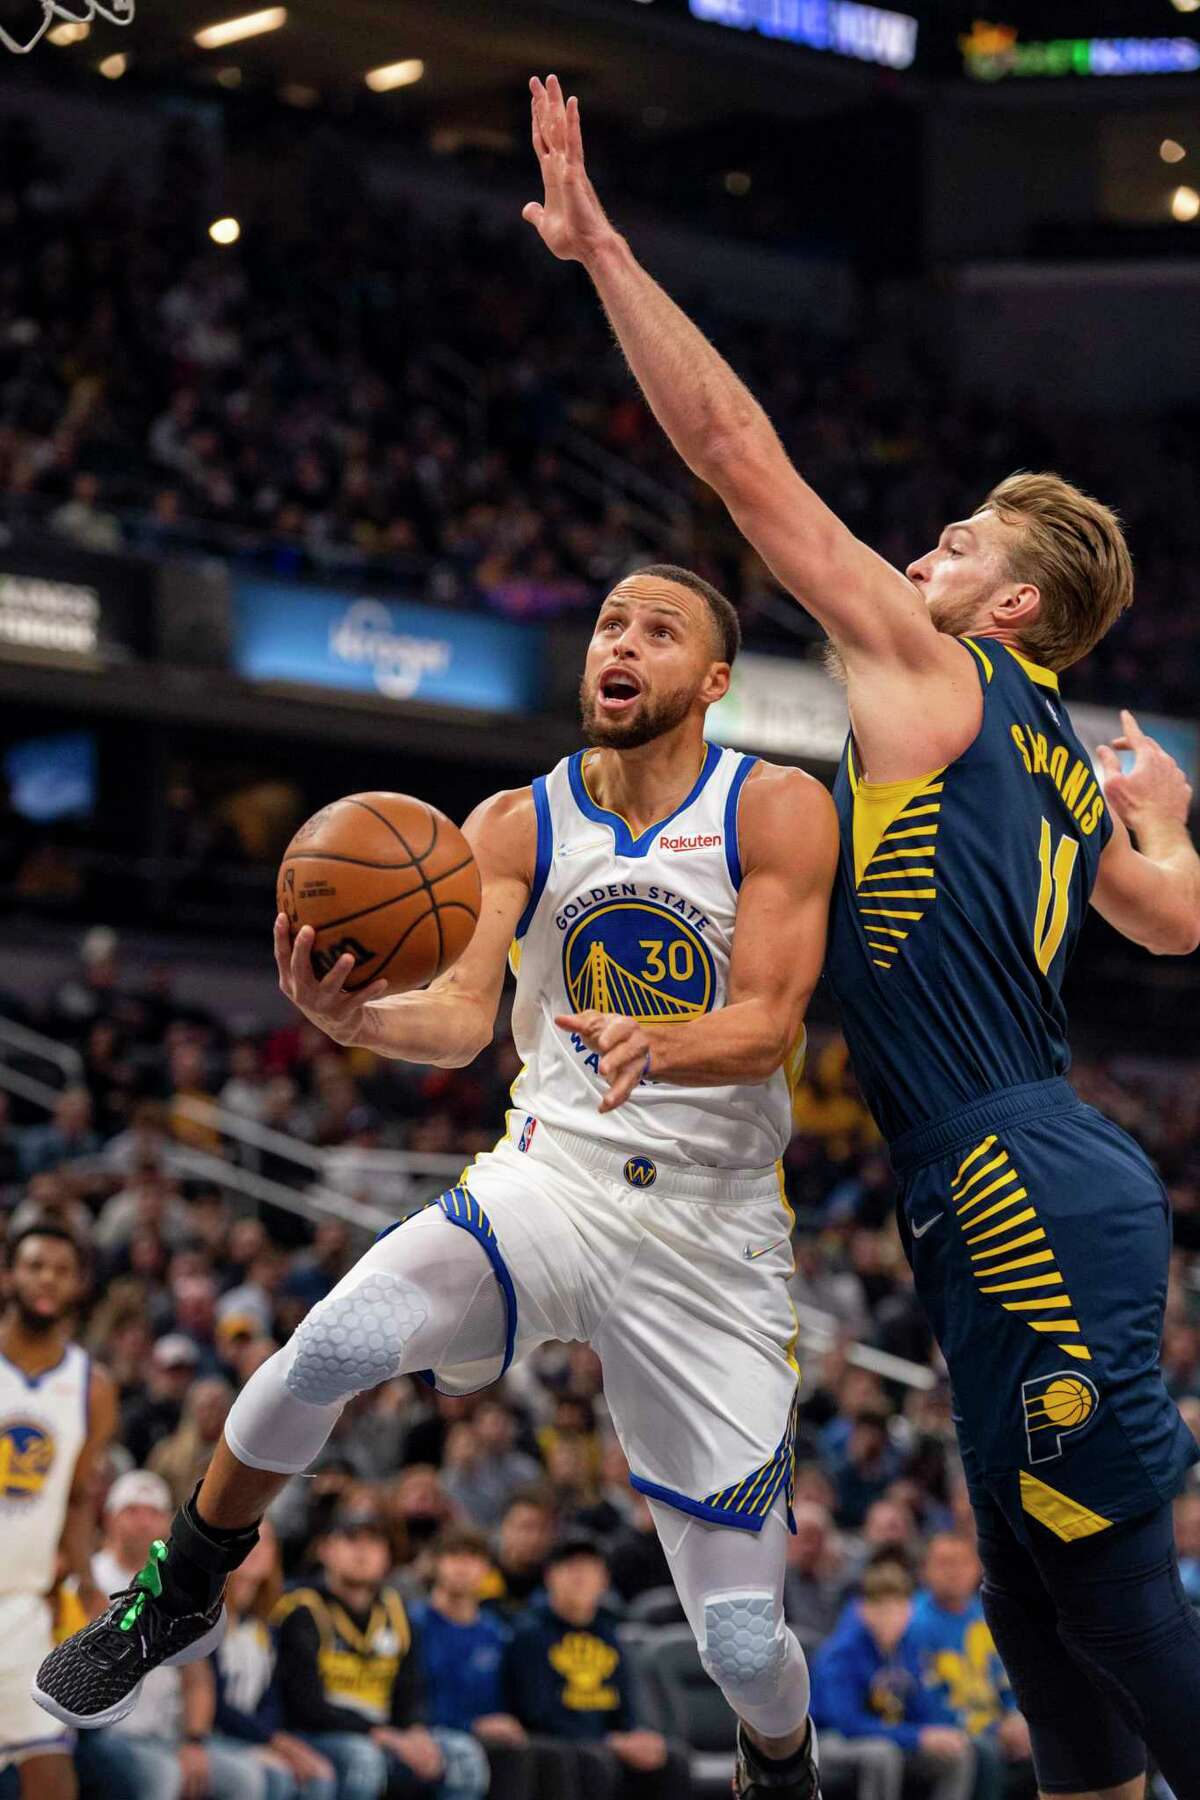 Golden State Warriors guard Stephen Curry (30) slips under the defense of Indiana Pacers forward Domantas Sabonis (11) for a scoring attempt during the first half of an NBA basketball game in Indianapolis, Monday, Dec. 13, 2021. (AP Photo/Doug McSchooler)